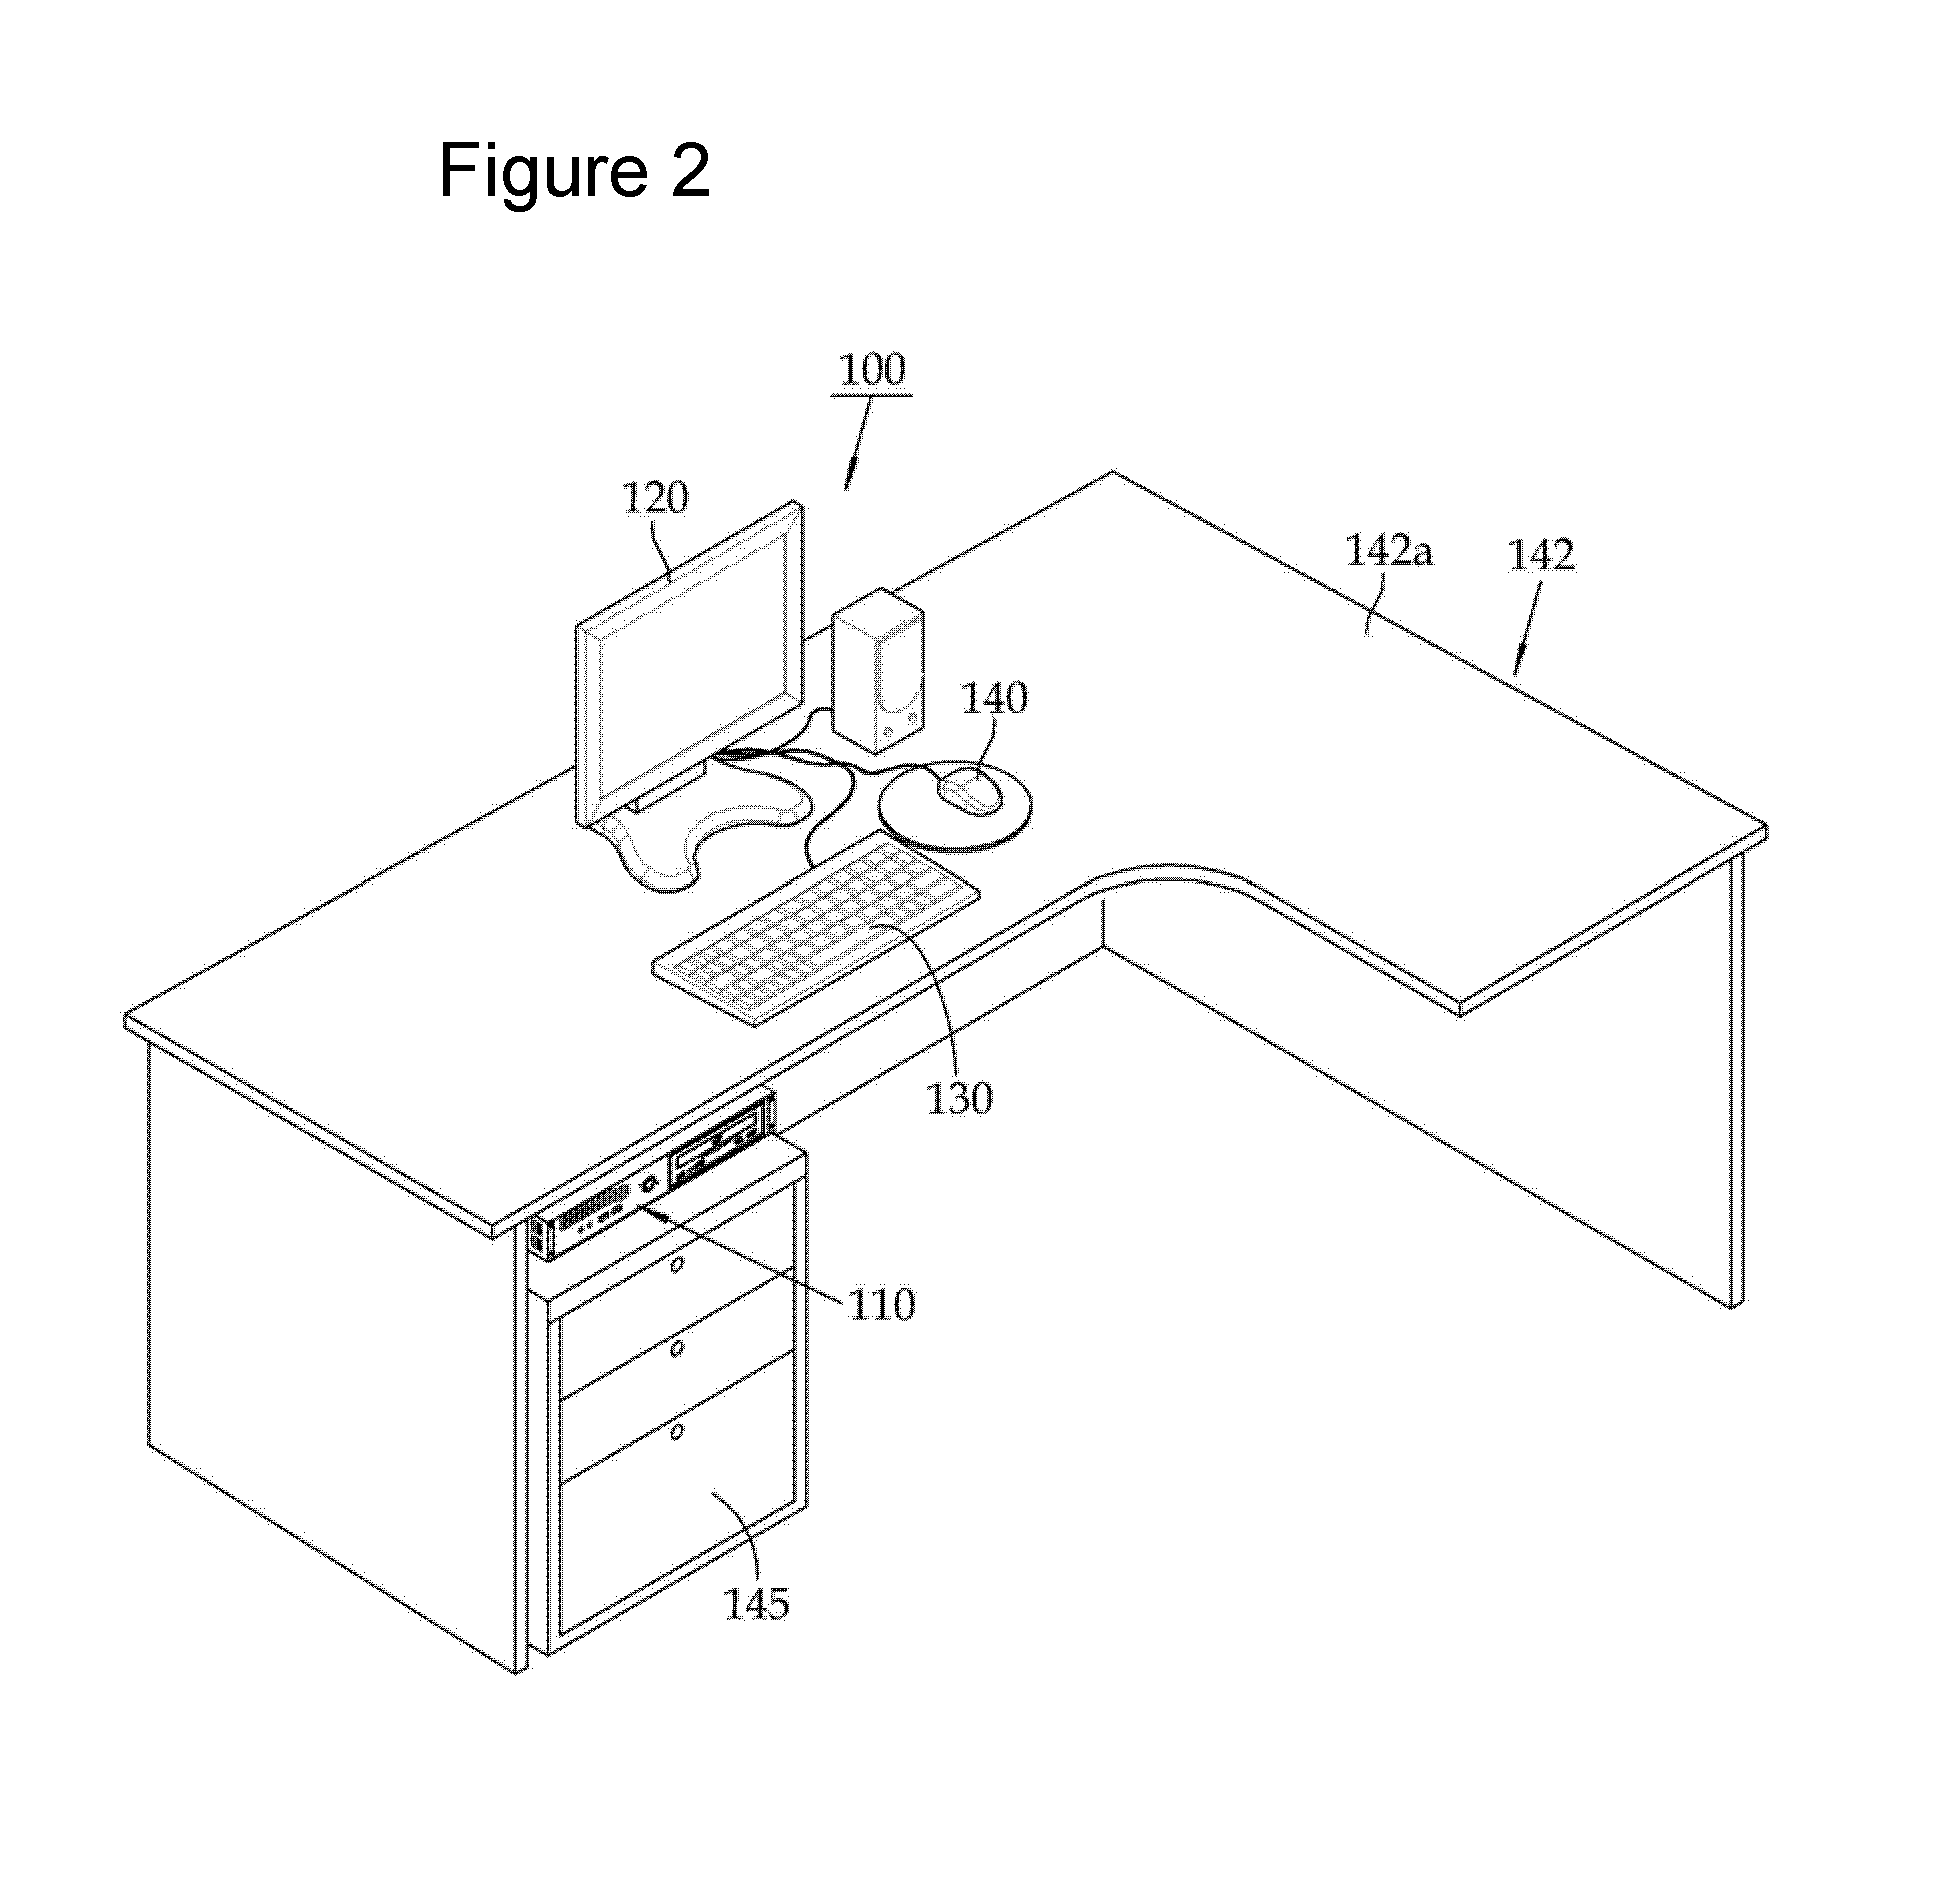 Computer attachable to an undersurface of a desk